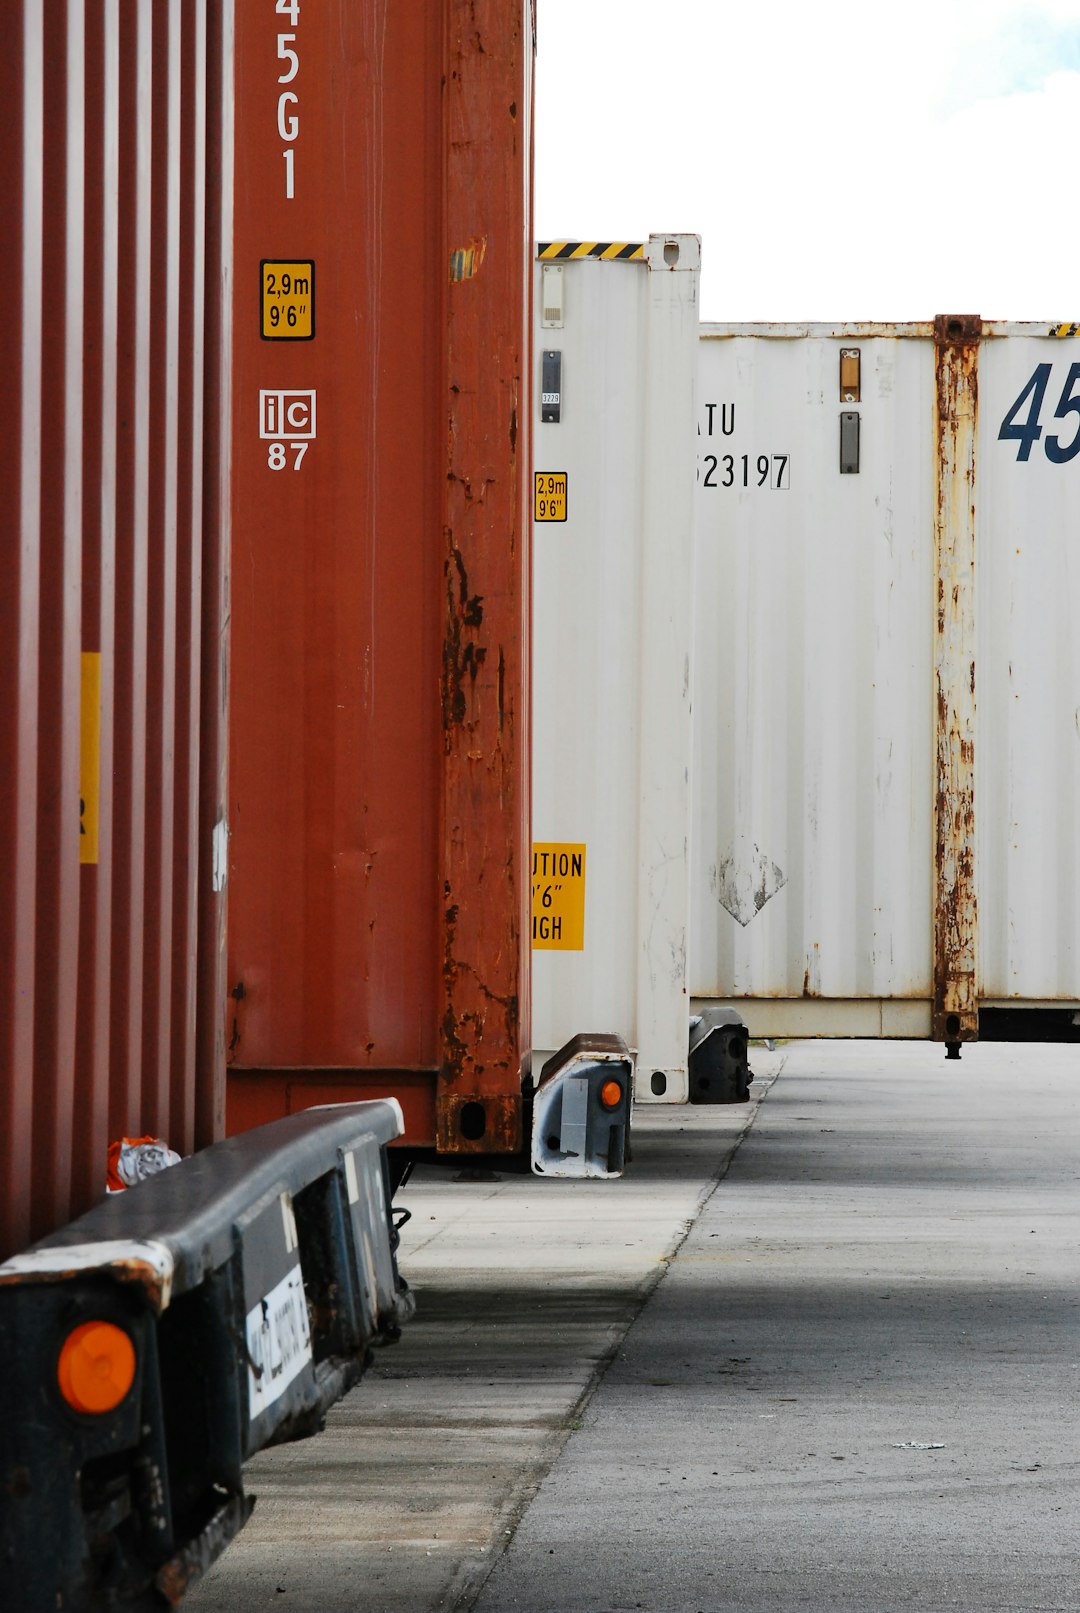 Why do shippers hire Freight Brokers?